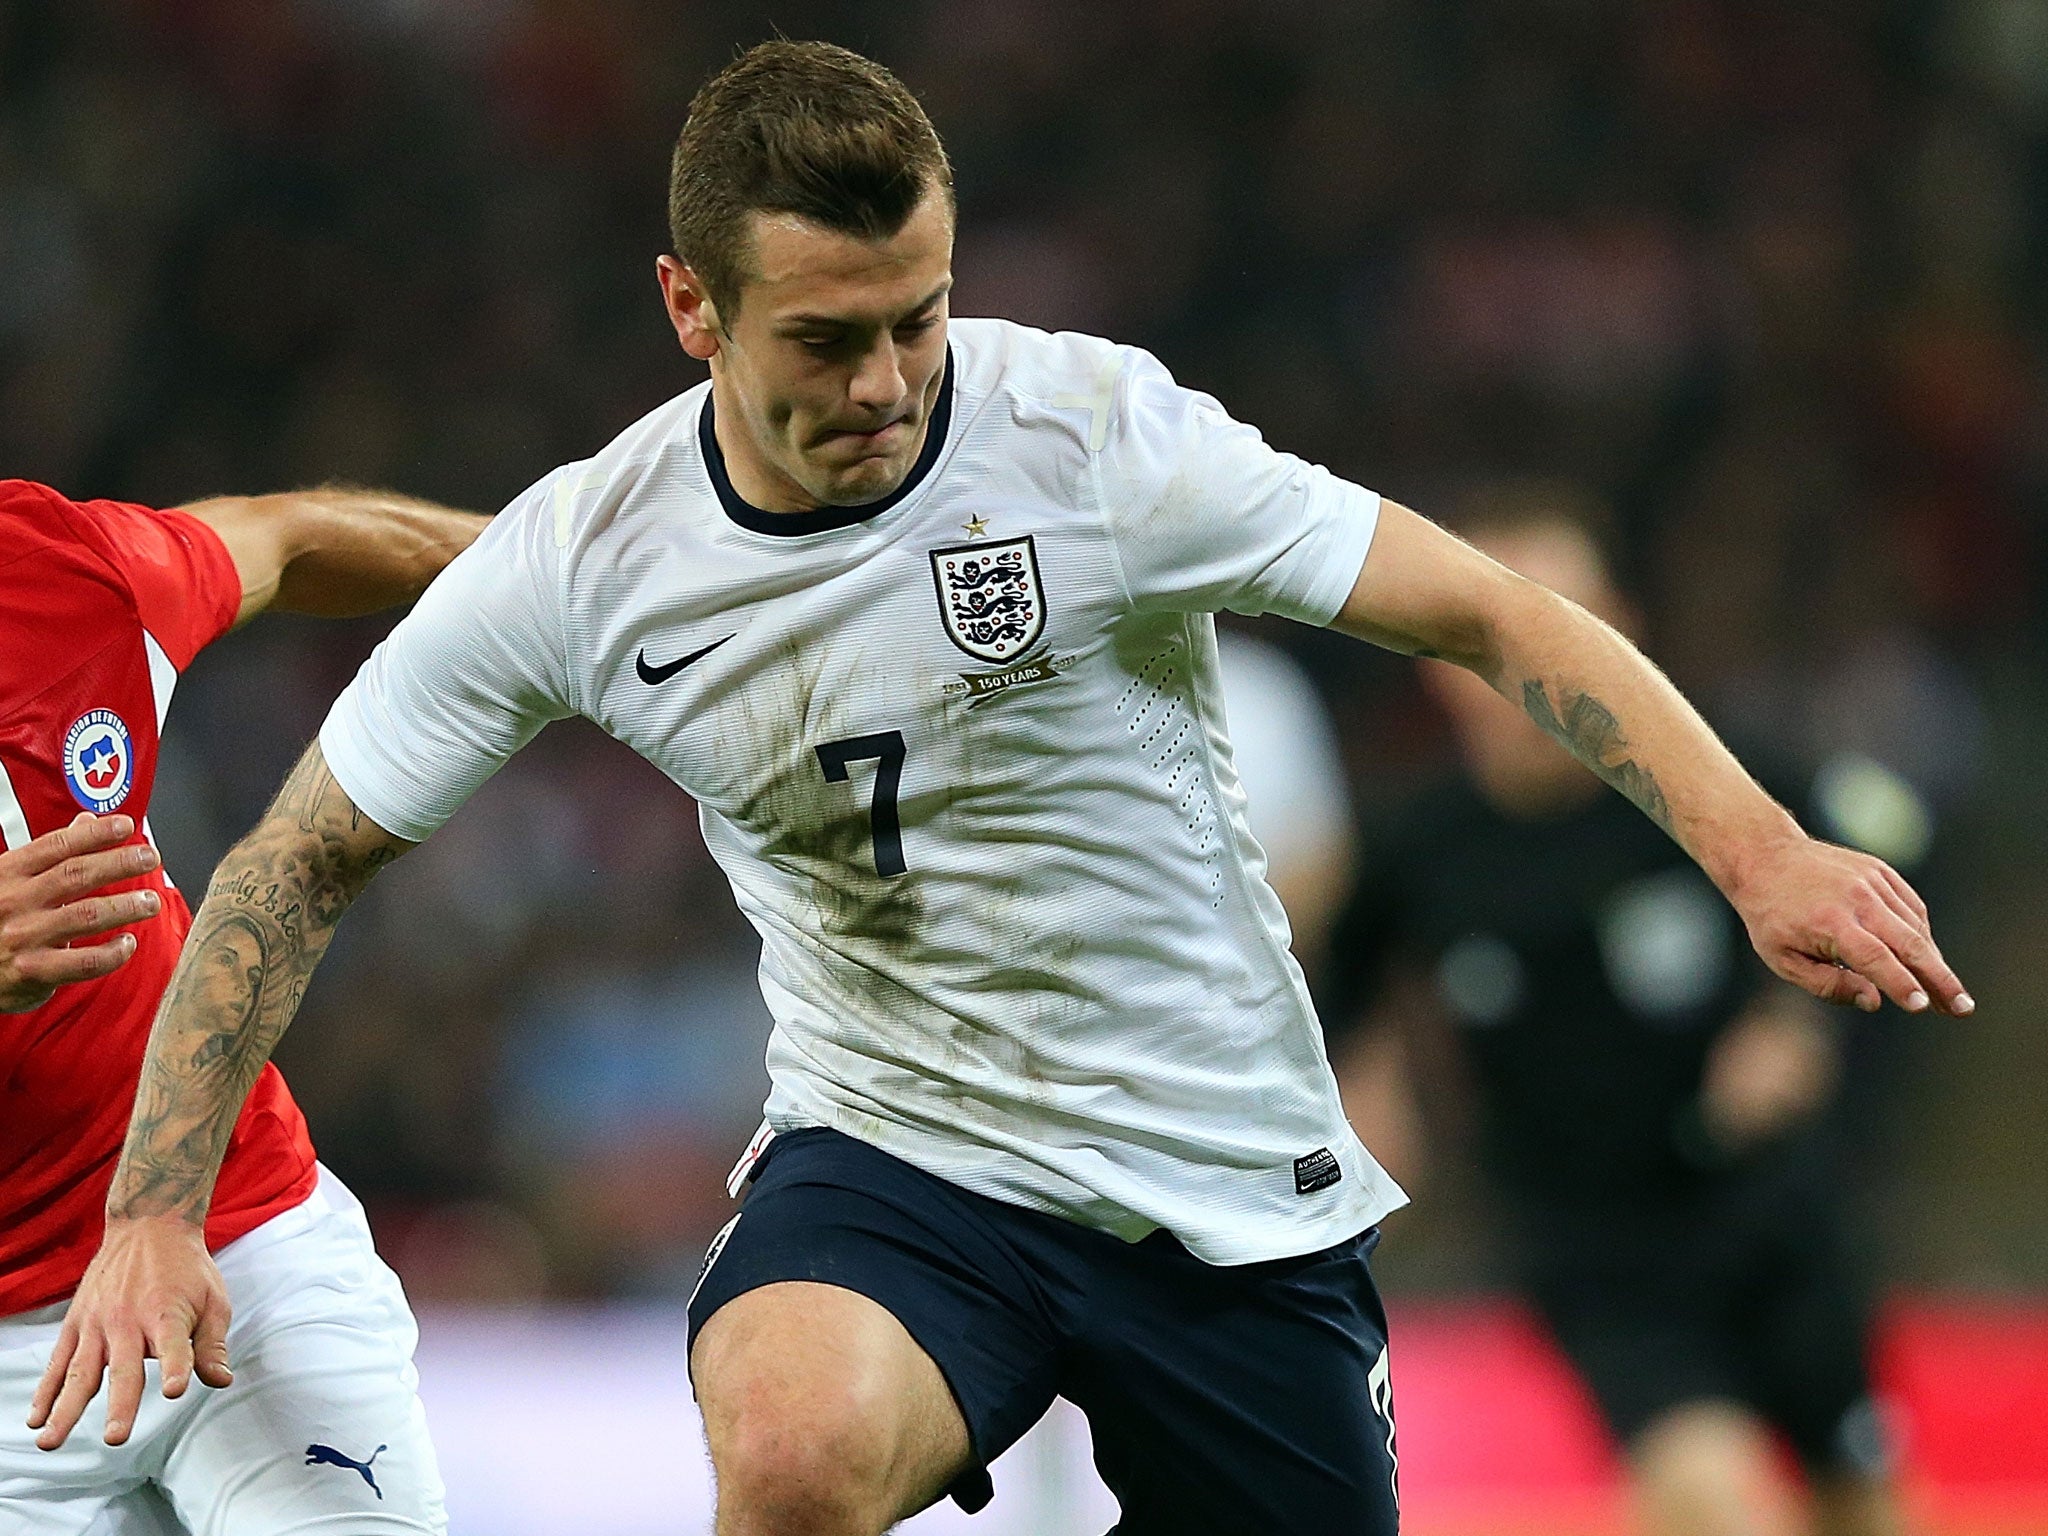 Jack Wilshere appeared in both of England's recent friendlies